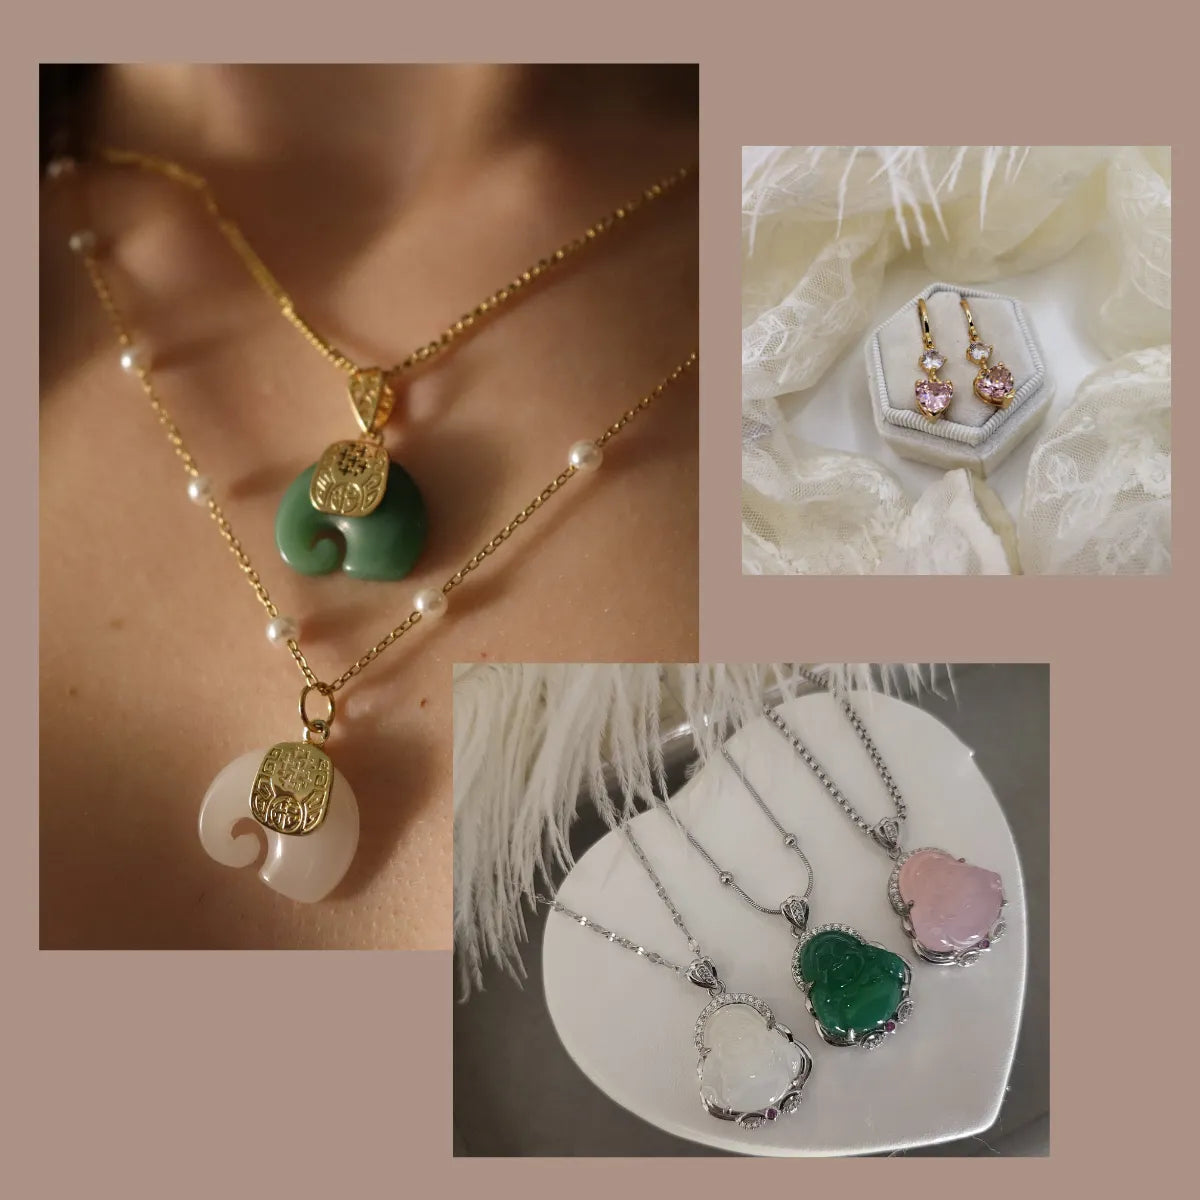 An elegant selection of handmade jewelry items. Represent 3 products. 1st is the jade elephant necklaces in both green and white color, 2nd is the heart shaped dangle earrings and 3rd is the jade buddha necklaces.